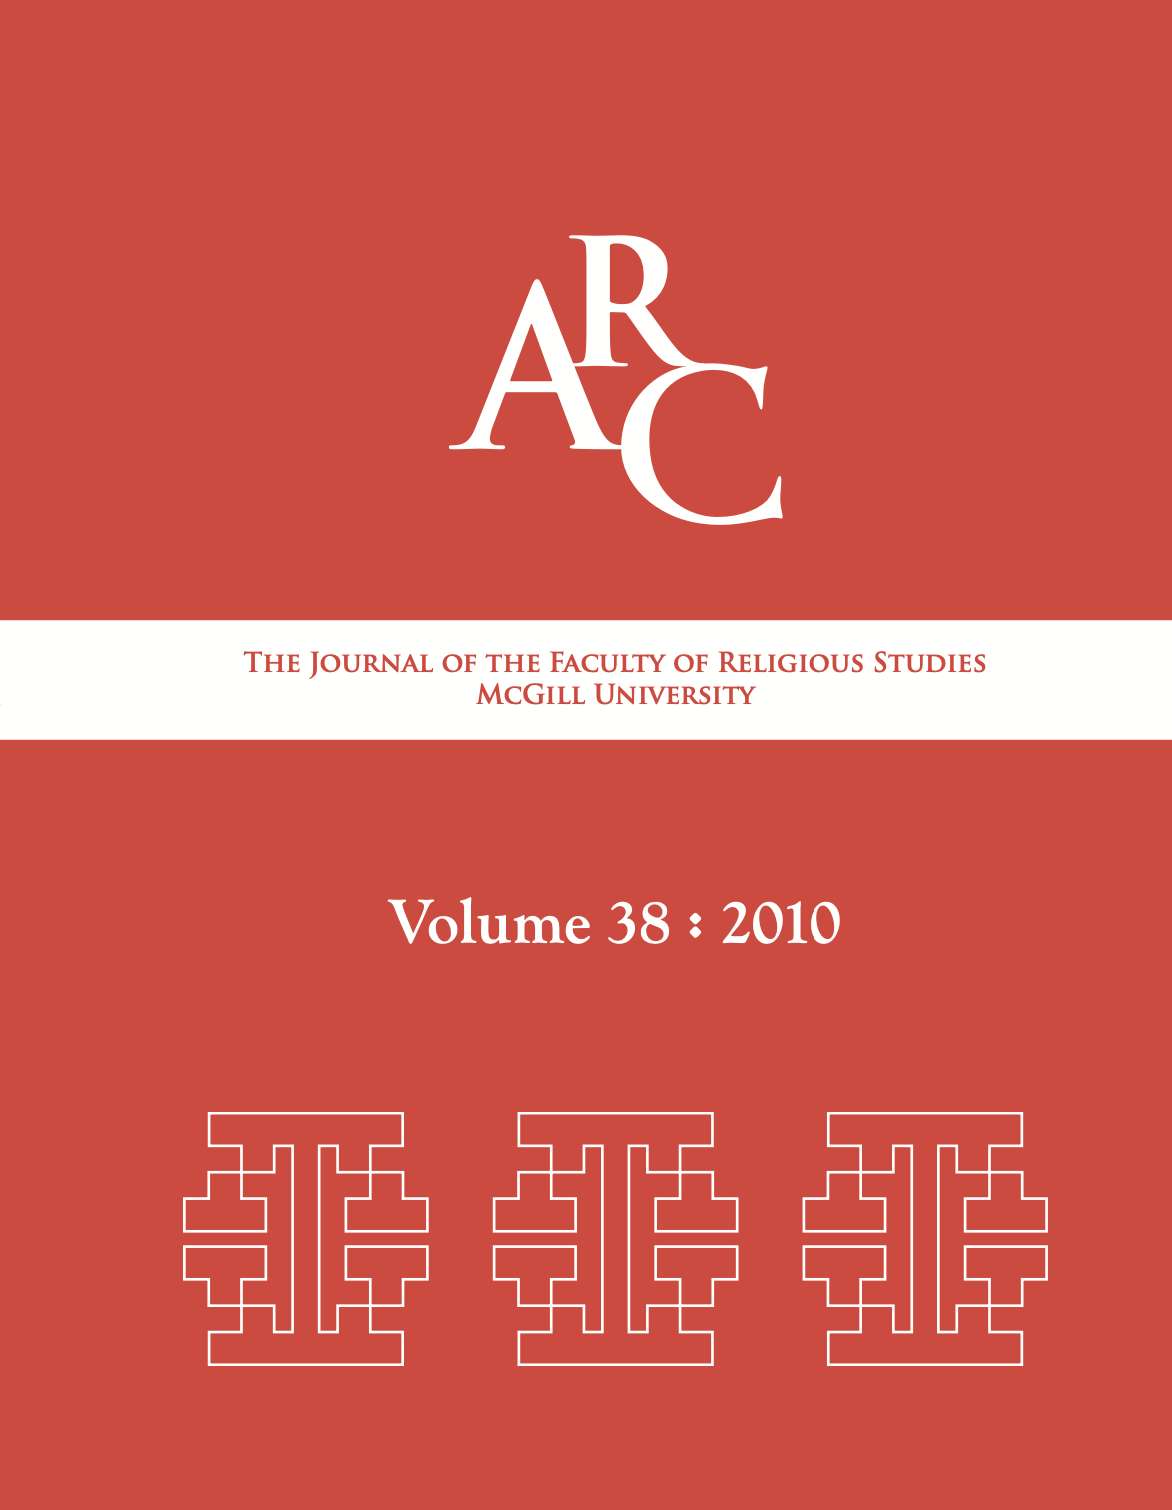 					View Vol. 38 (2010): Arc: The Journal of the Faculty of Religious Studies
				